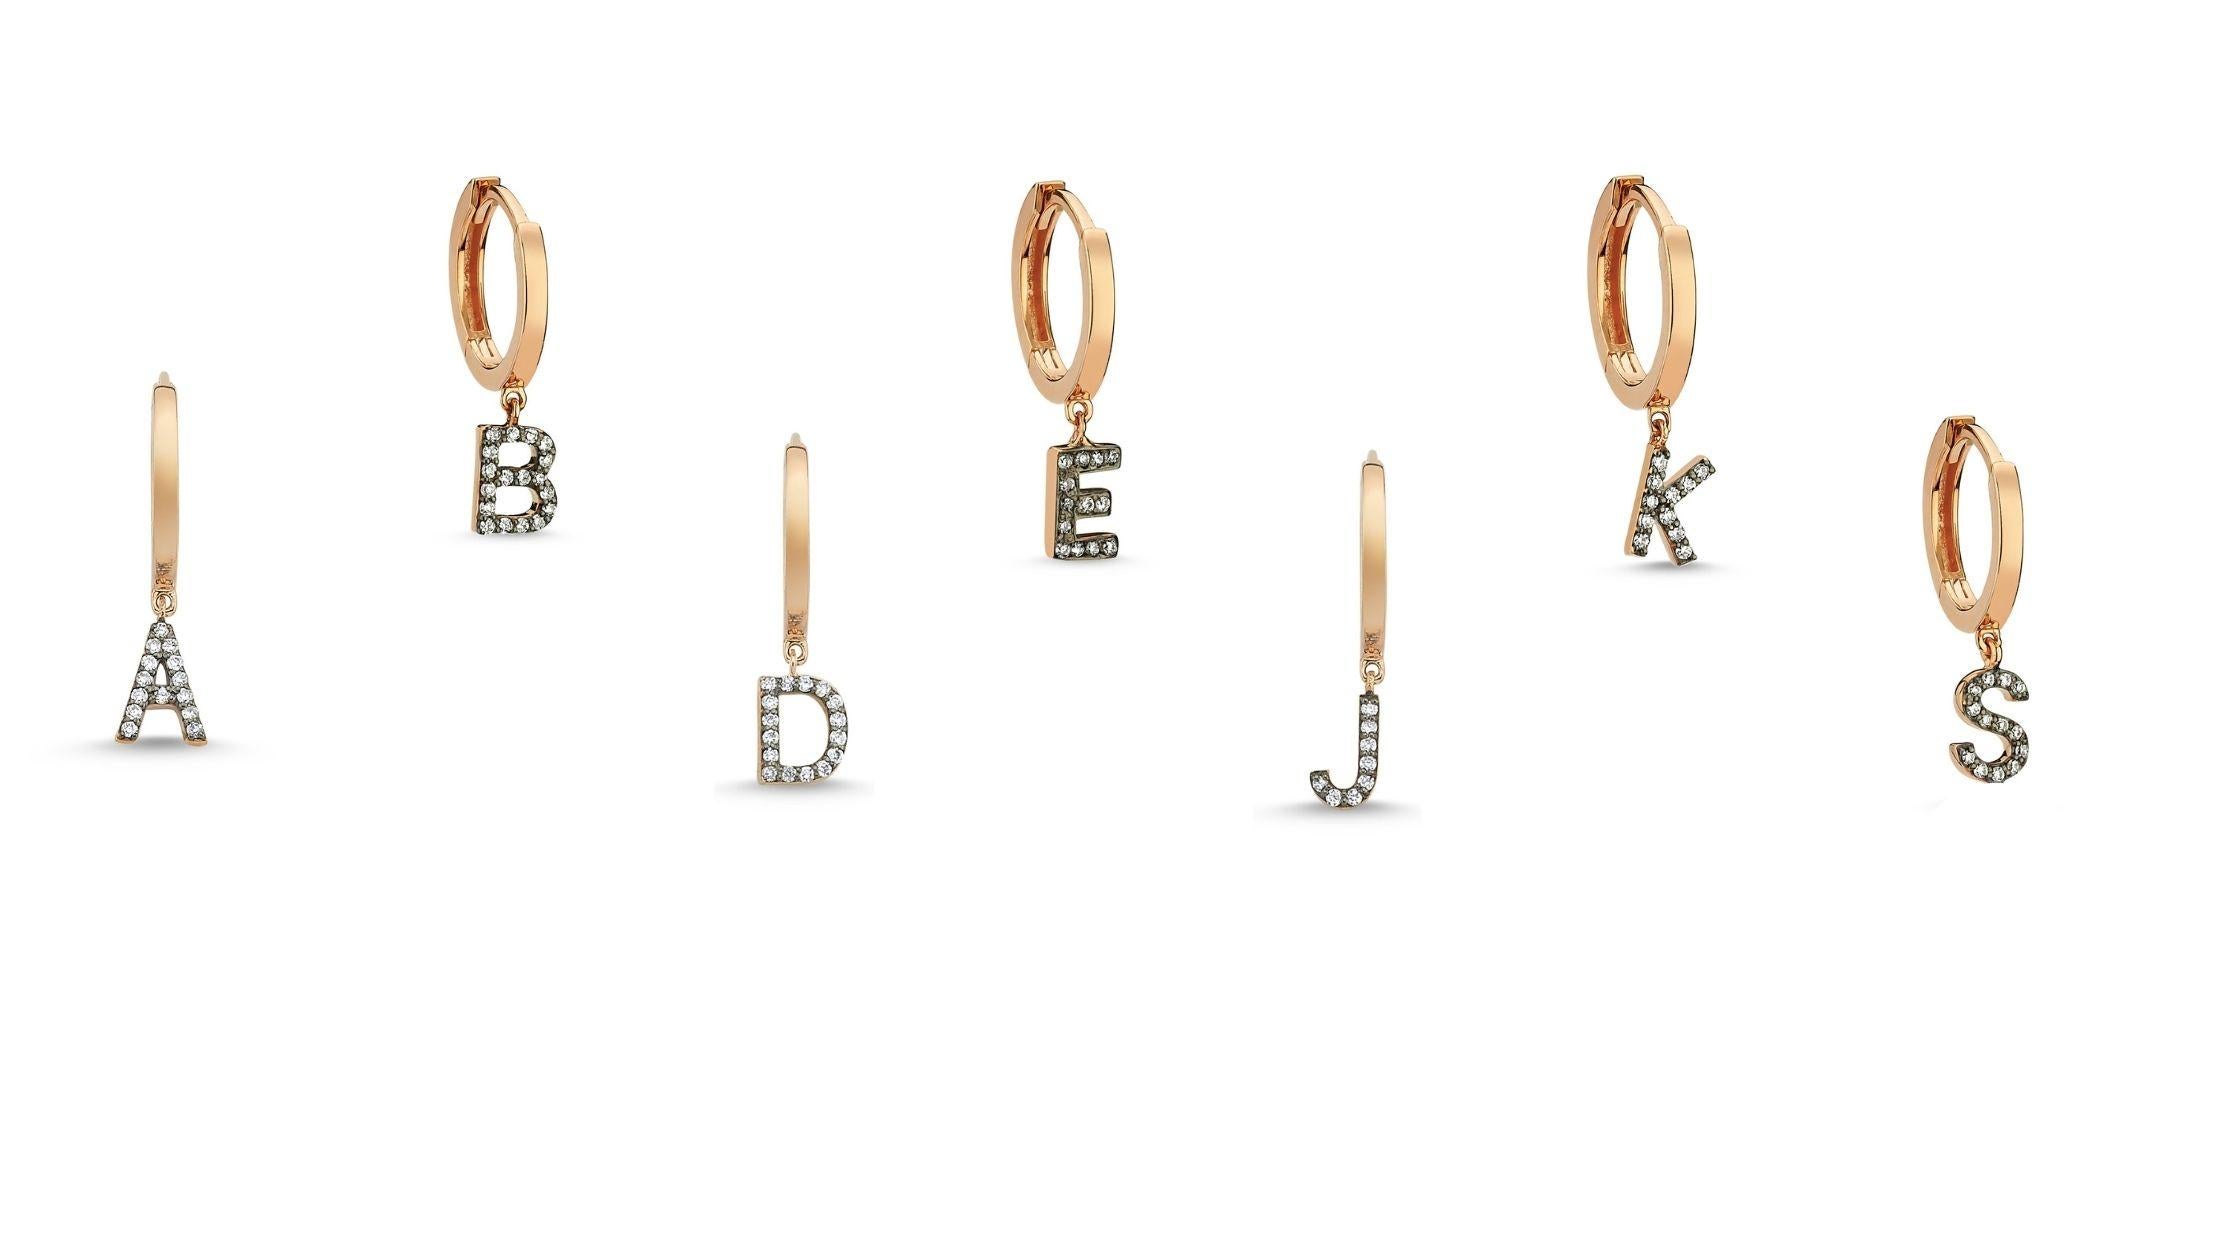 Letter A (single) 14k rose gold earring with white diamond by Selda Jewellery

Additional Information:-
Collection: Letter Collection
14k Rose gold
0.05ct White diamond
Letter height 1cm